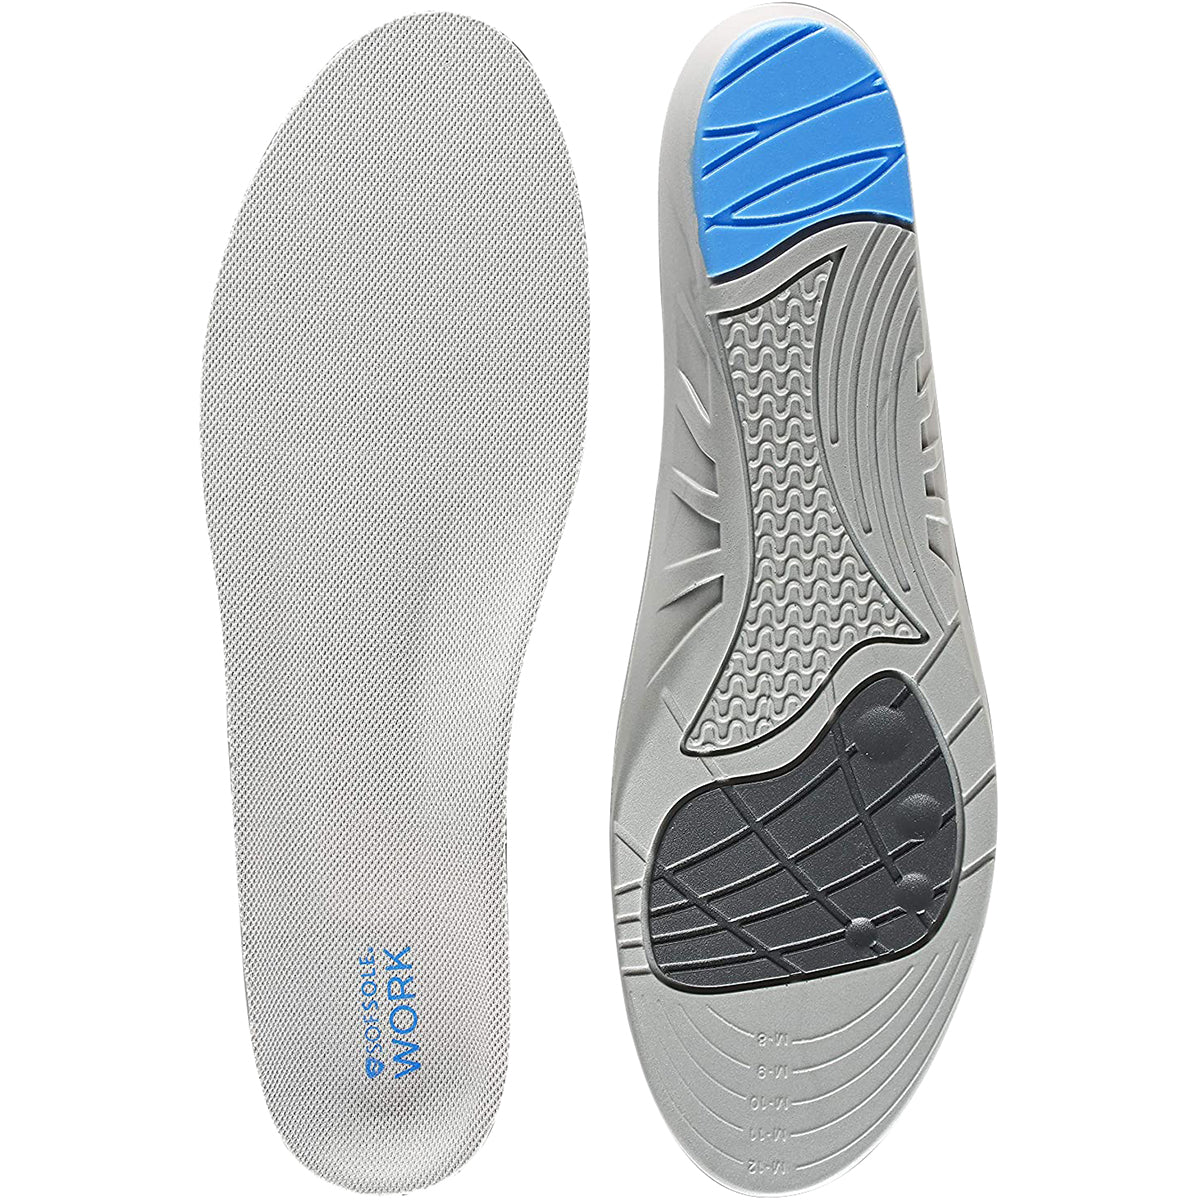 Sof Sole Full Length Work Shoe Insoles - Women's 5-11 SofSole